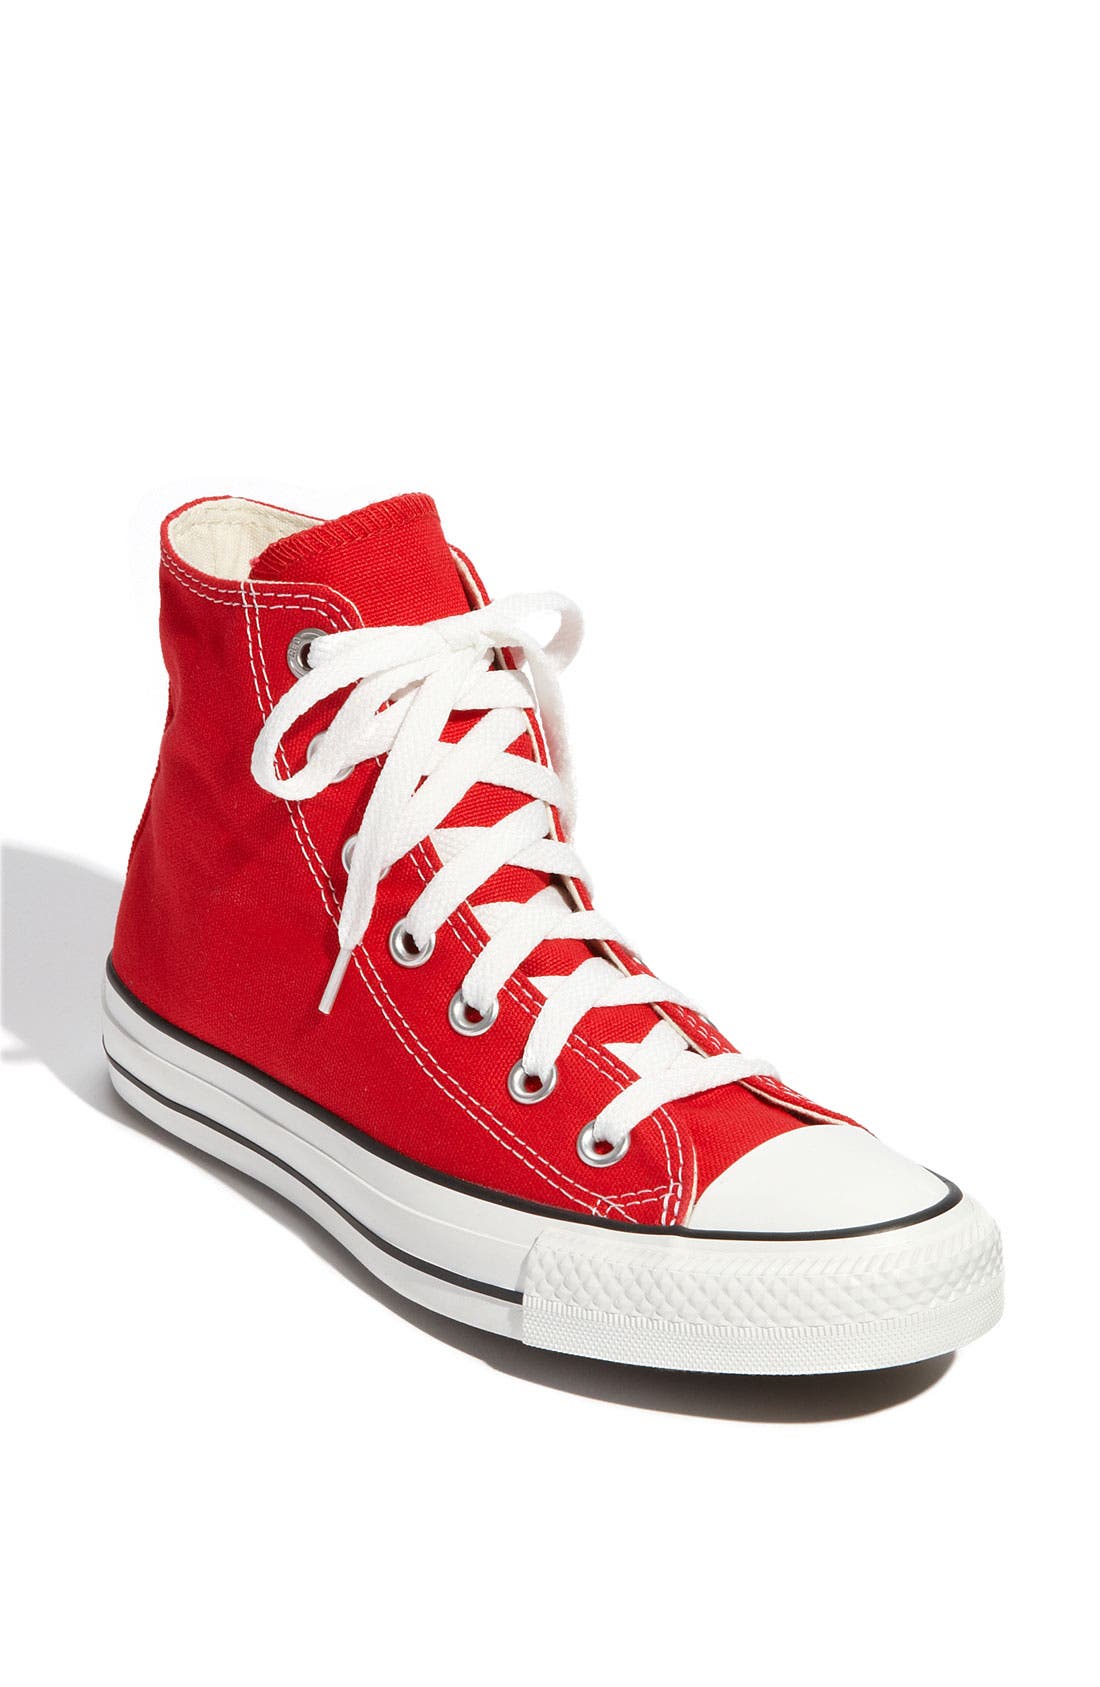 red converse wedges